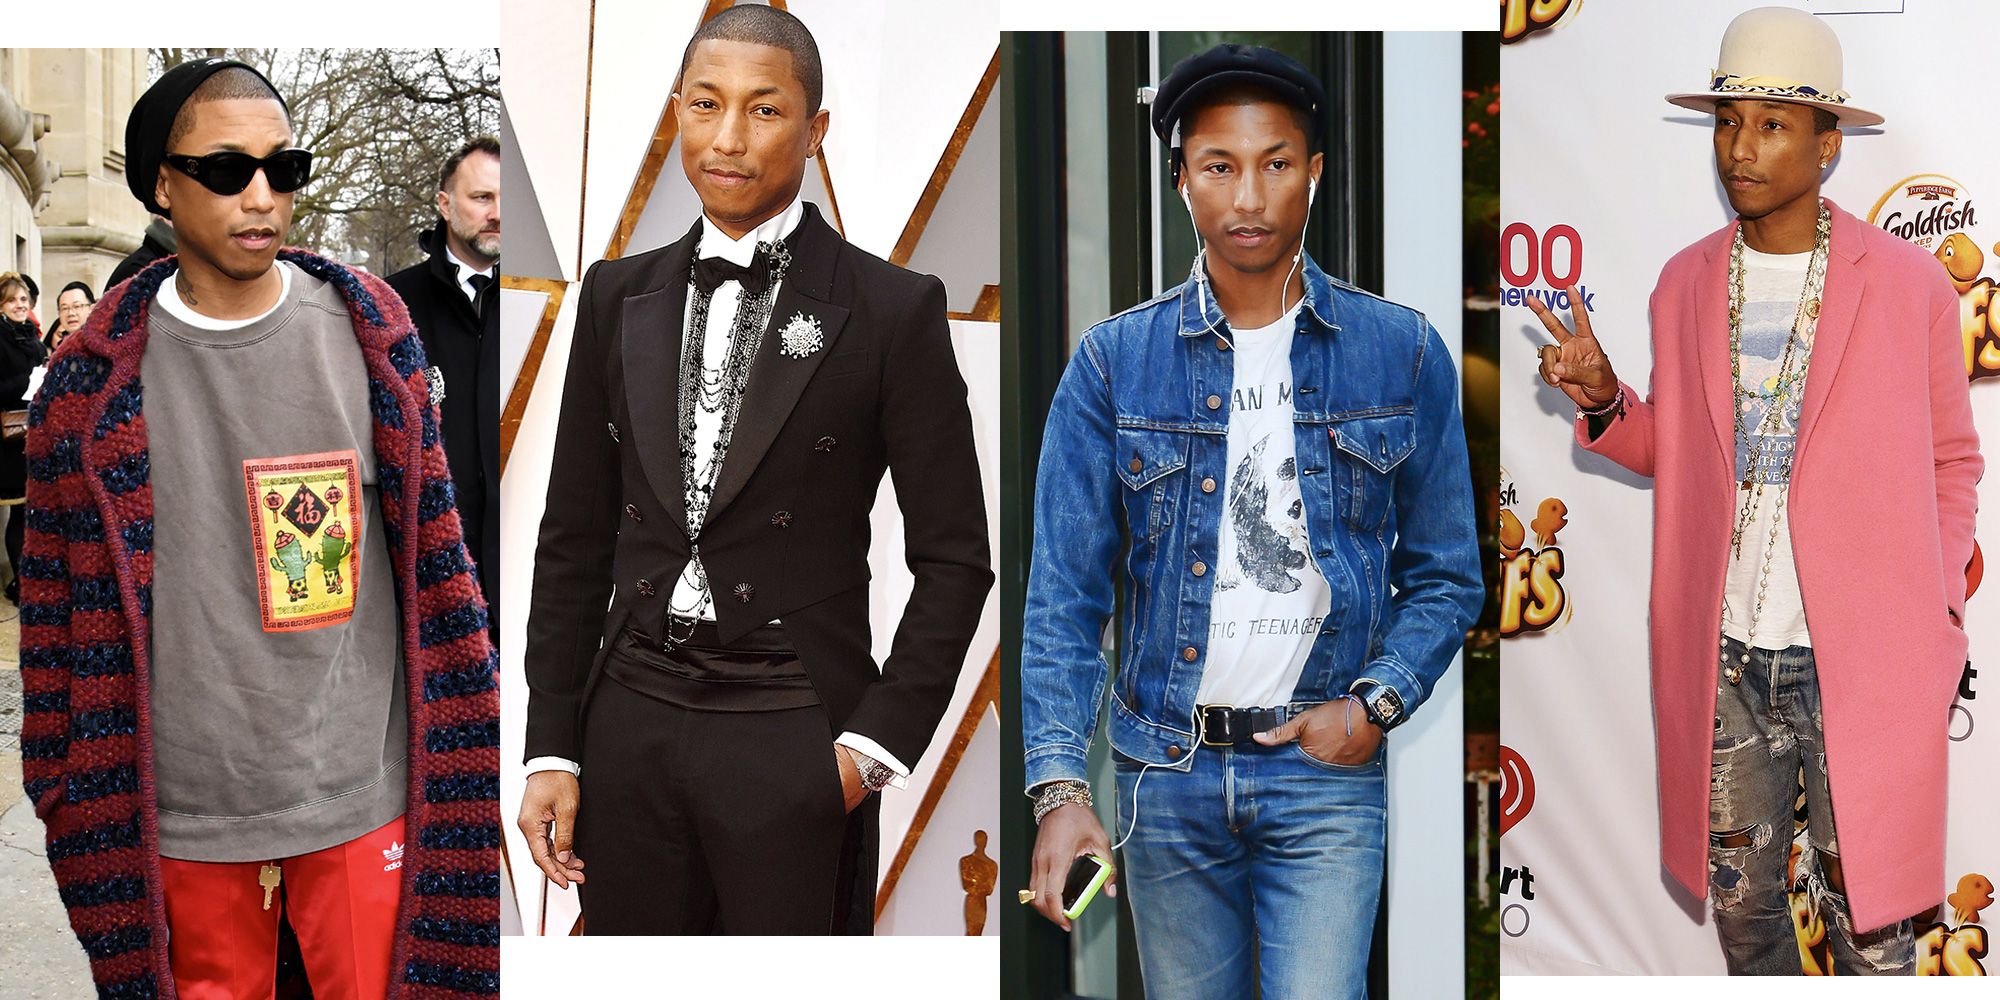 Pharrell Williams shows off his quirky style in a khaki blanket